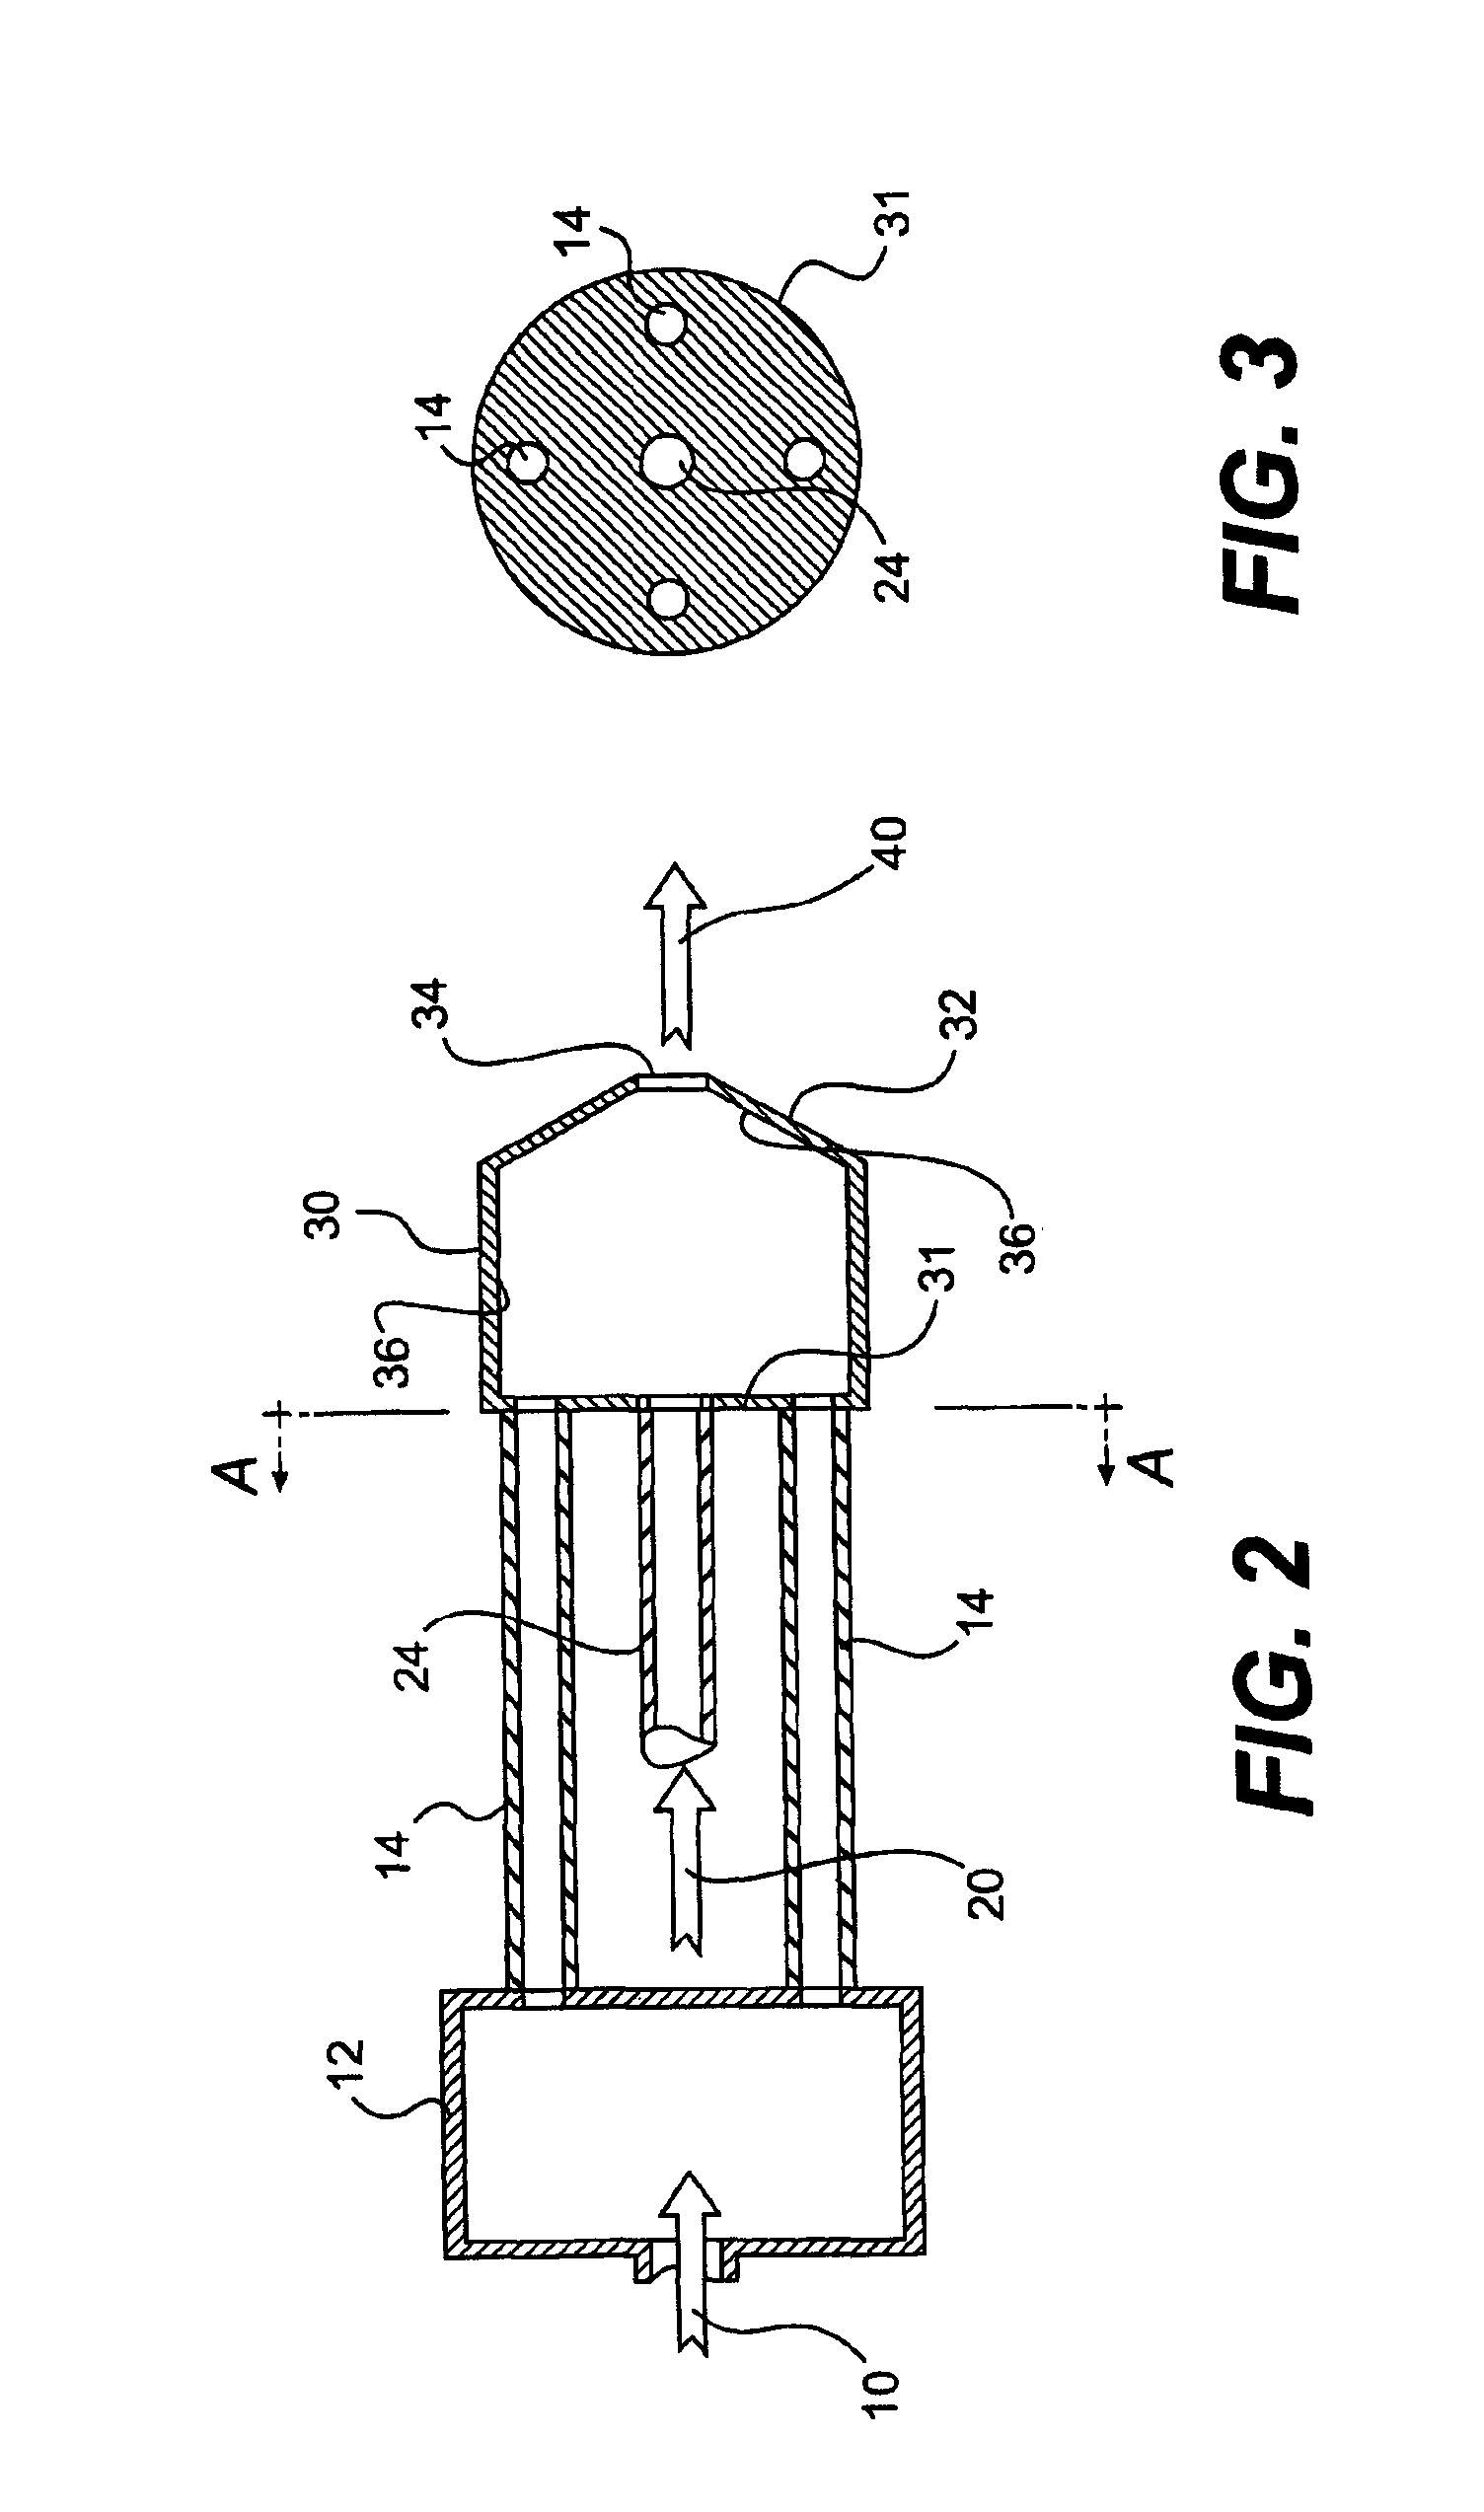 Method and apparatus for mixing gases